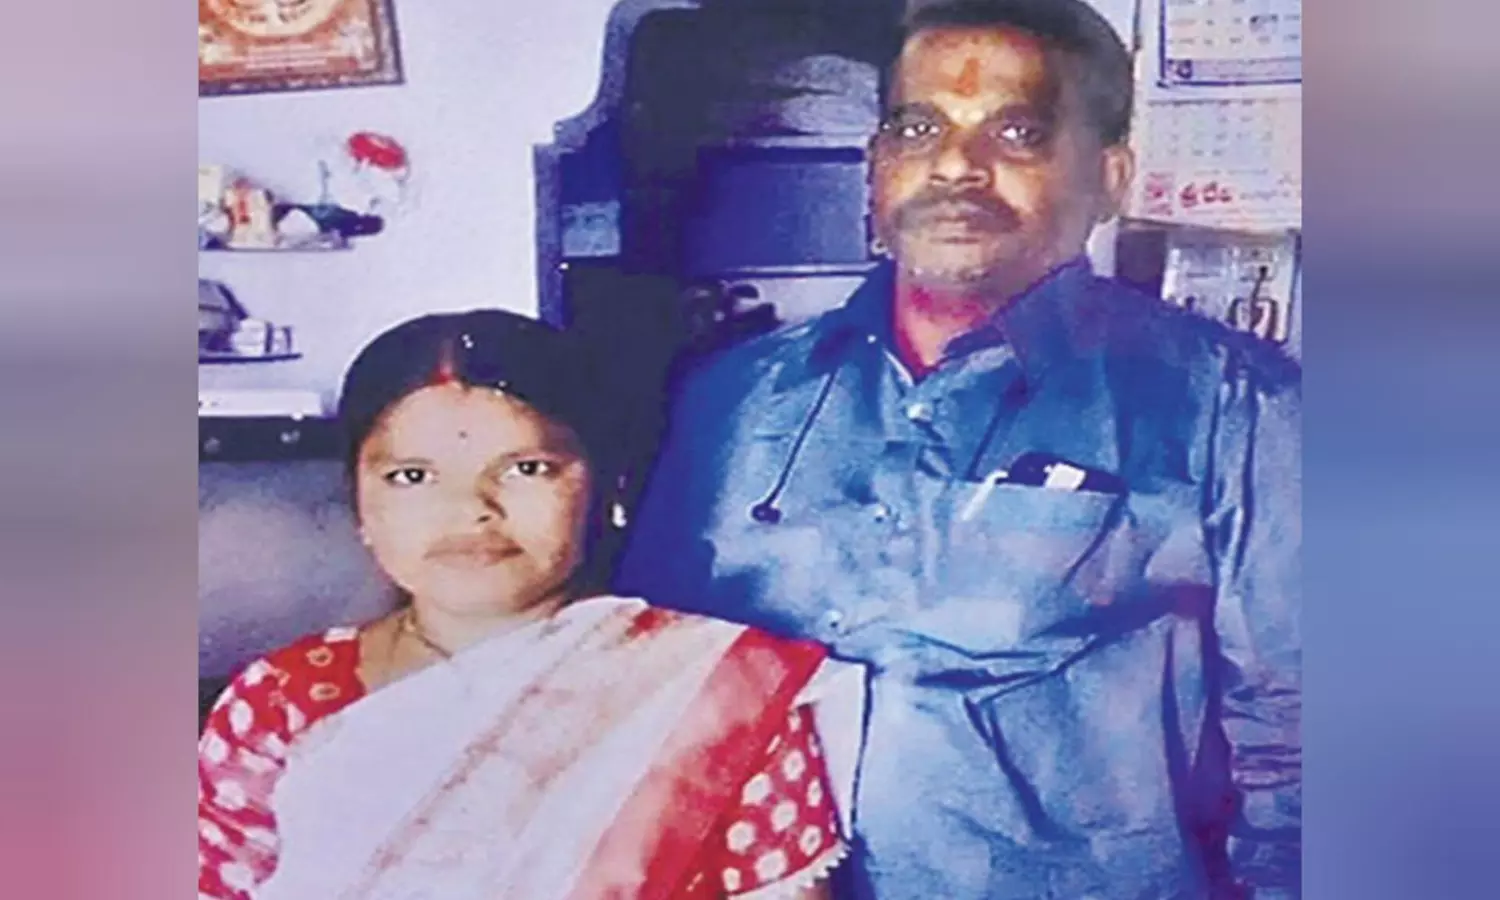 Free bus service: Autorickshaw driver hangs wife, ends life in suicide pact over loss of income